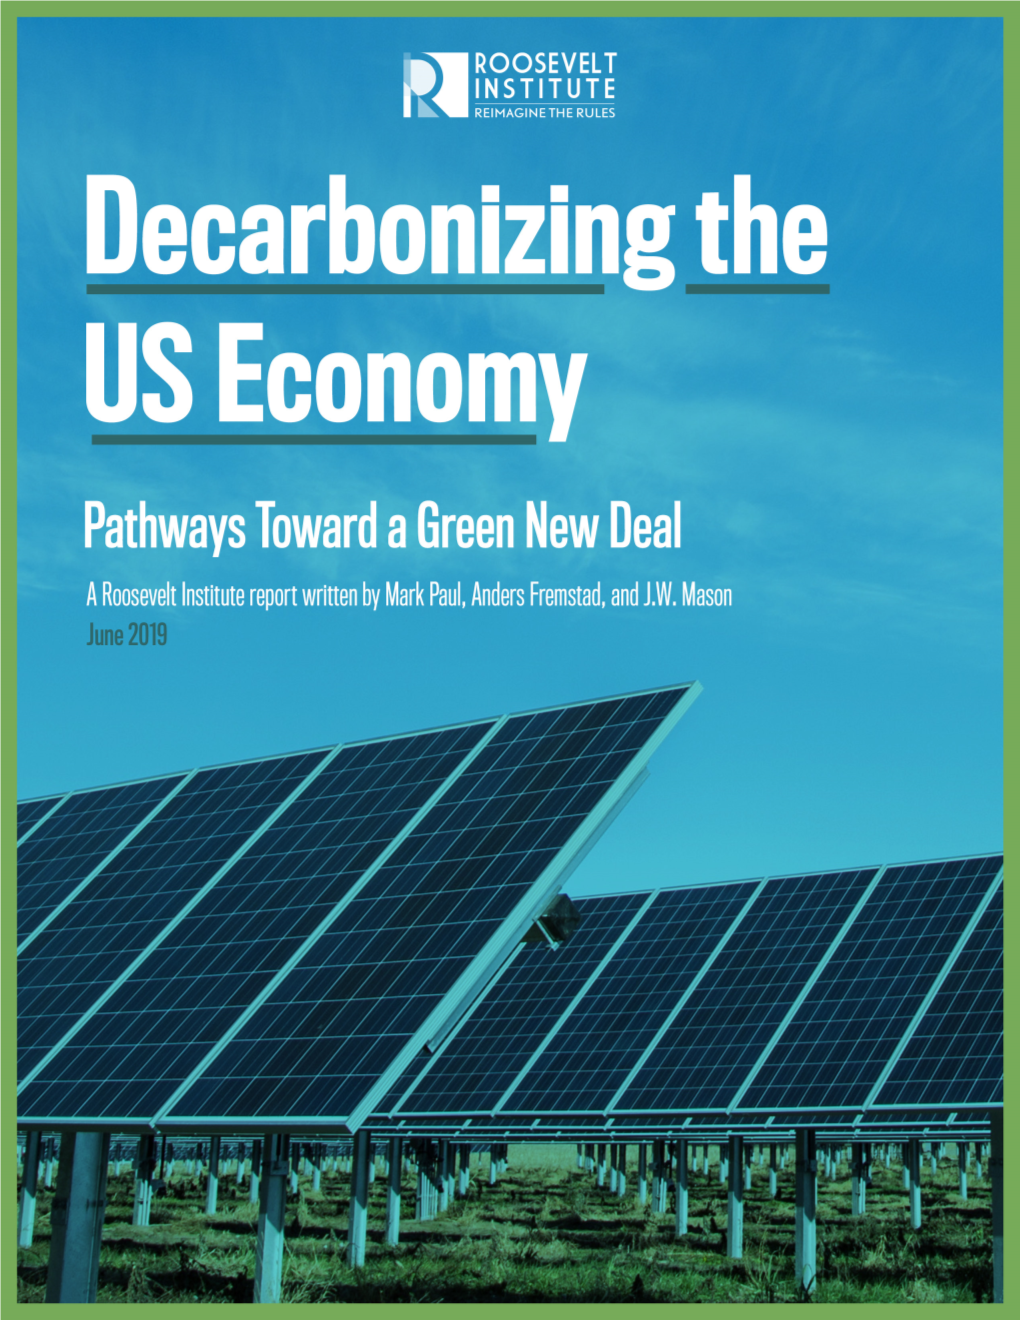 Decarbonizing the US Economy: Pathways Toward a Green New Deal